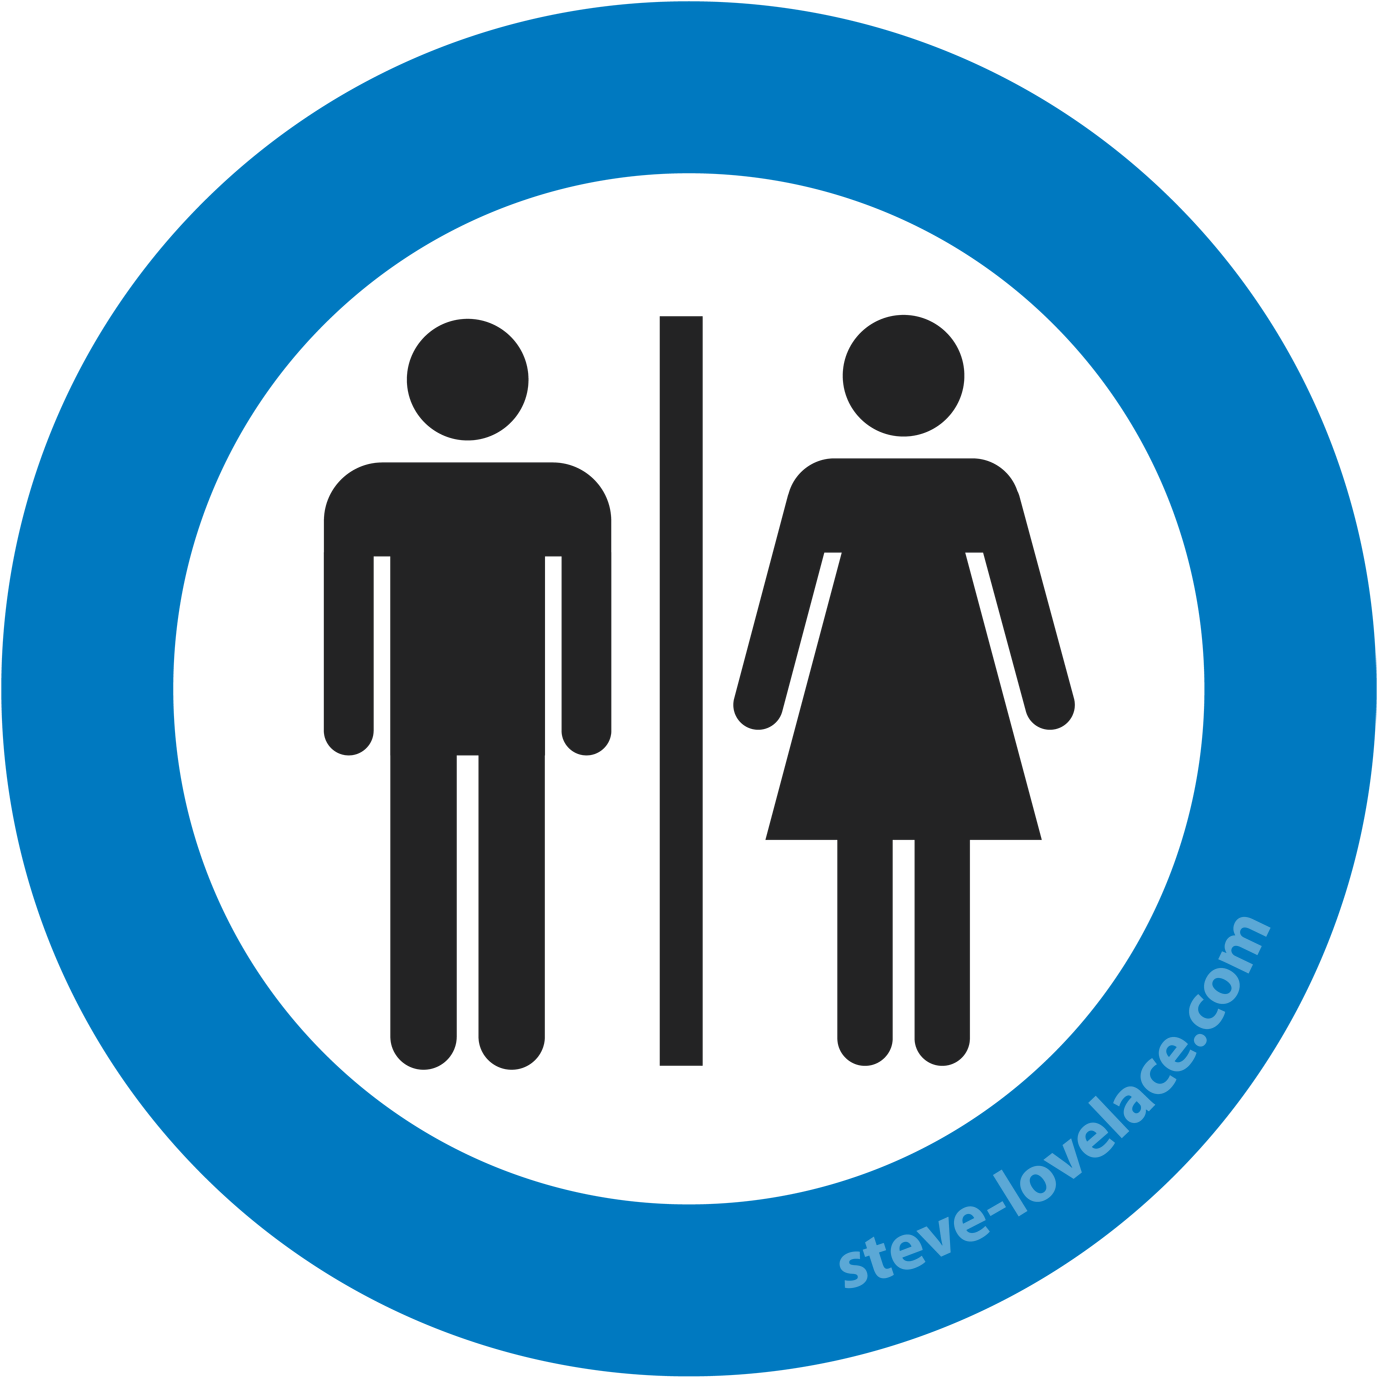 Do Not Throw Towels Or Feminine Products In The Toilet - Toilet Symbol (1500x1500)